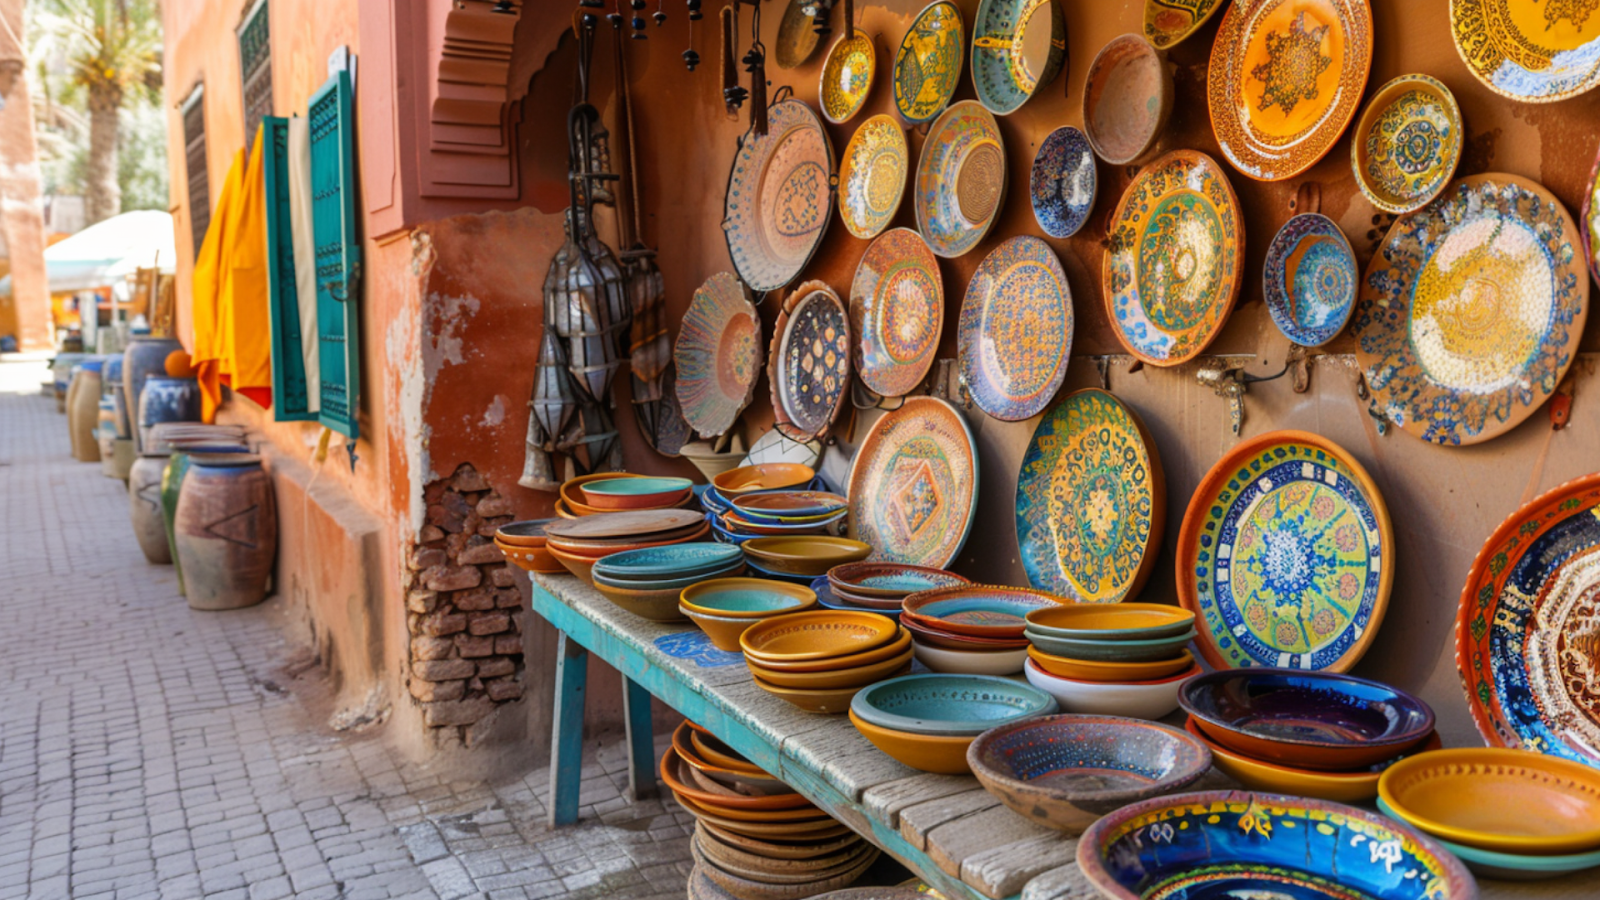 A souk selling Moroccan plates in Marrakesh